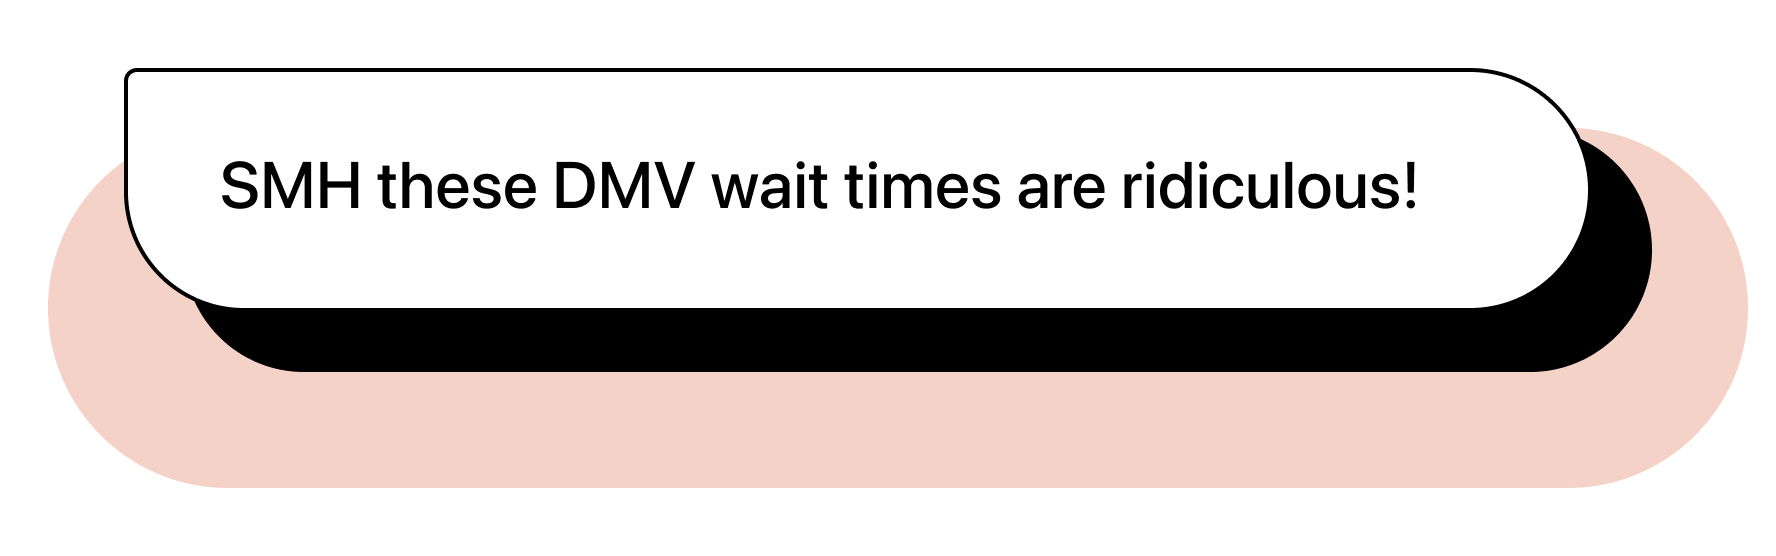 Chat bubble illustration with text: "SMH these DMV wait times are ridiculous!"